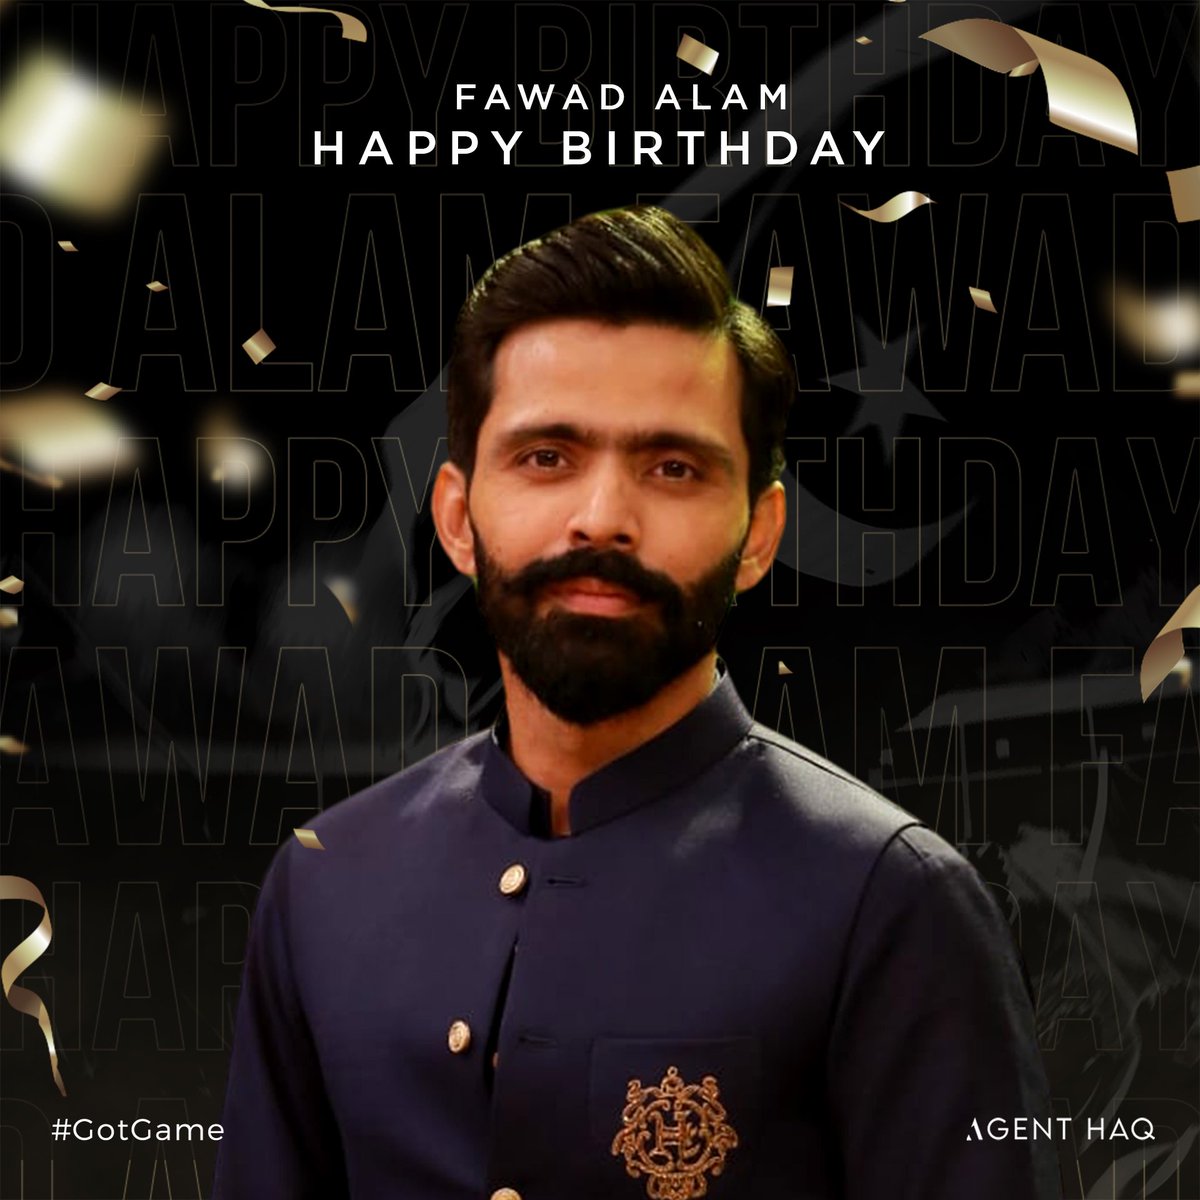 Test Average 3️⃣9️⃣ ODI Average 4️⃣0️⃣+ Tenth 🇵🇰 to score a 💯 on Test debut 1️⃣4️⃣0️⃣0️⃣0️⃣+ runs in first-class cricket 🏏 We wish a very happy birthday to the Mr. Consistent @iamfawadalam25 🎂 May you have much more 🚀 And yes your #GotGame is FANTASTIC! 🤩